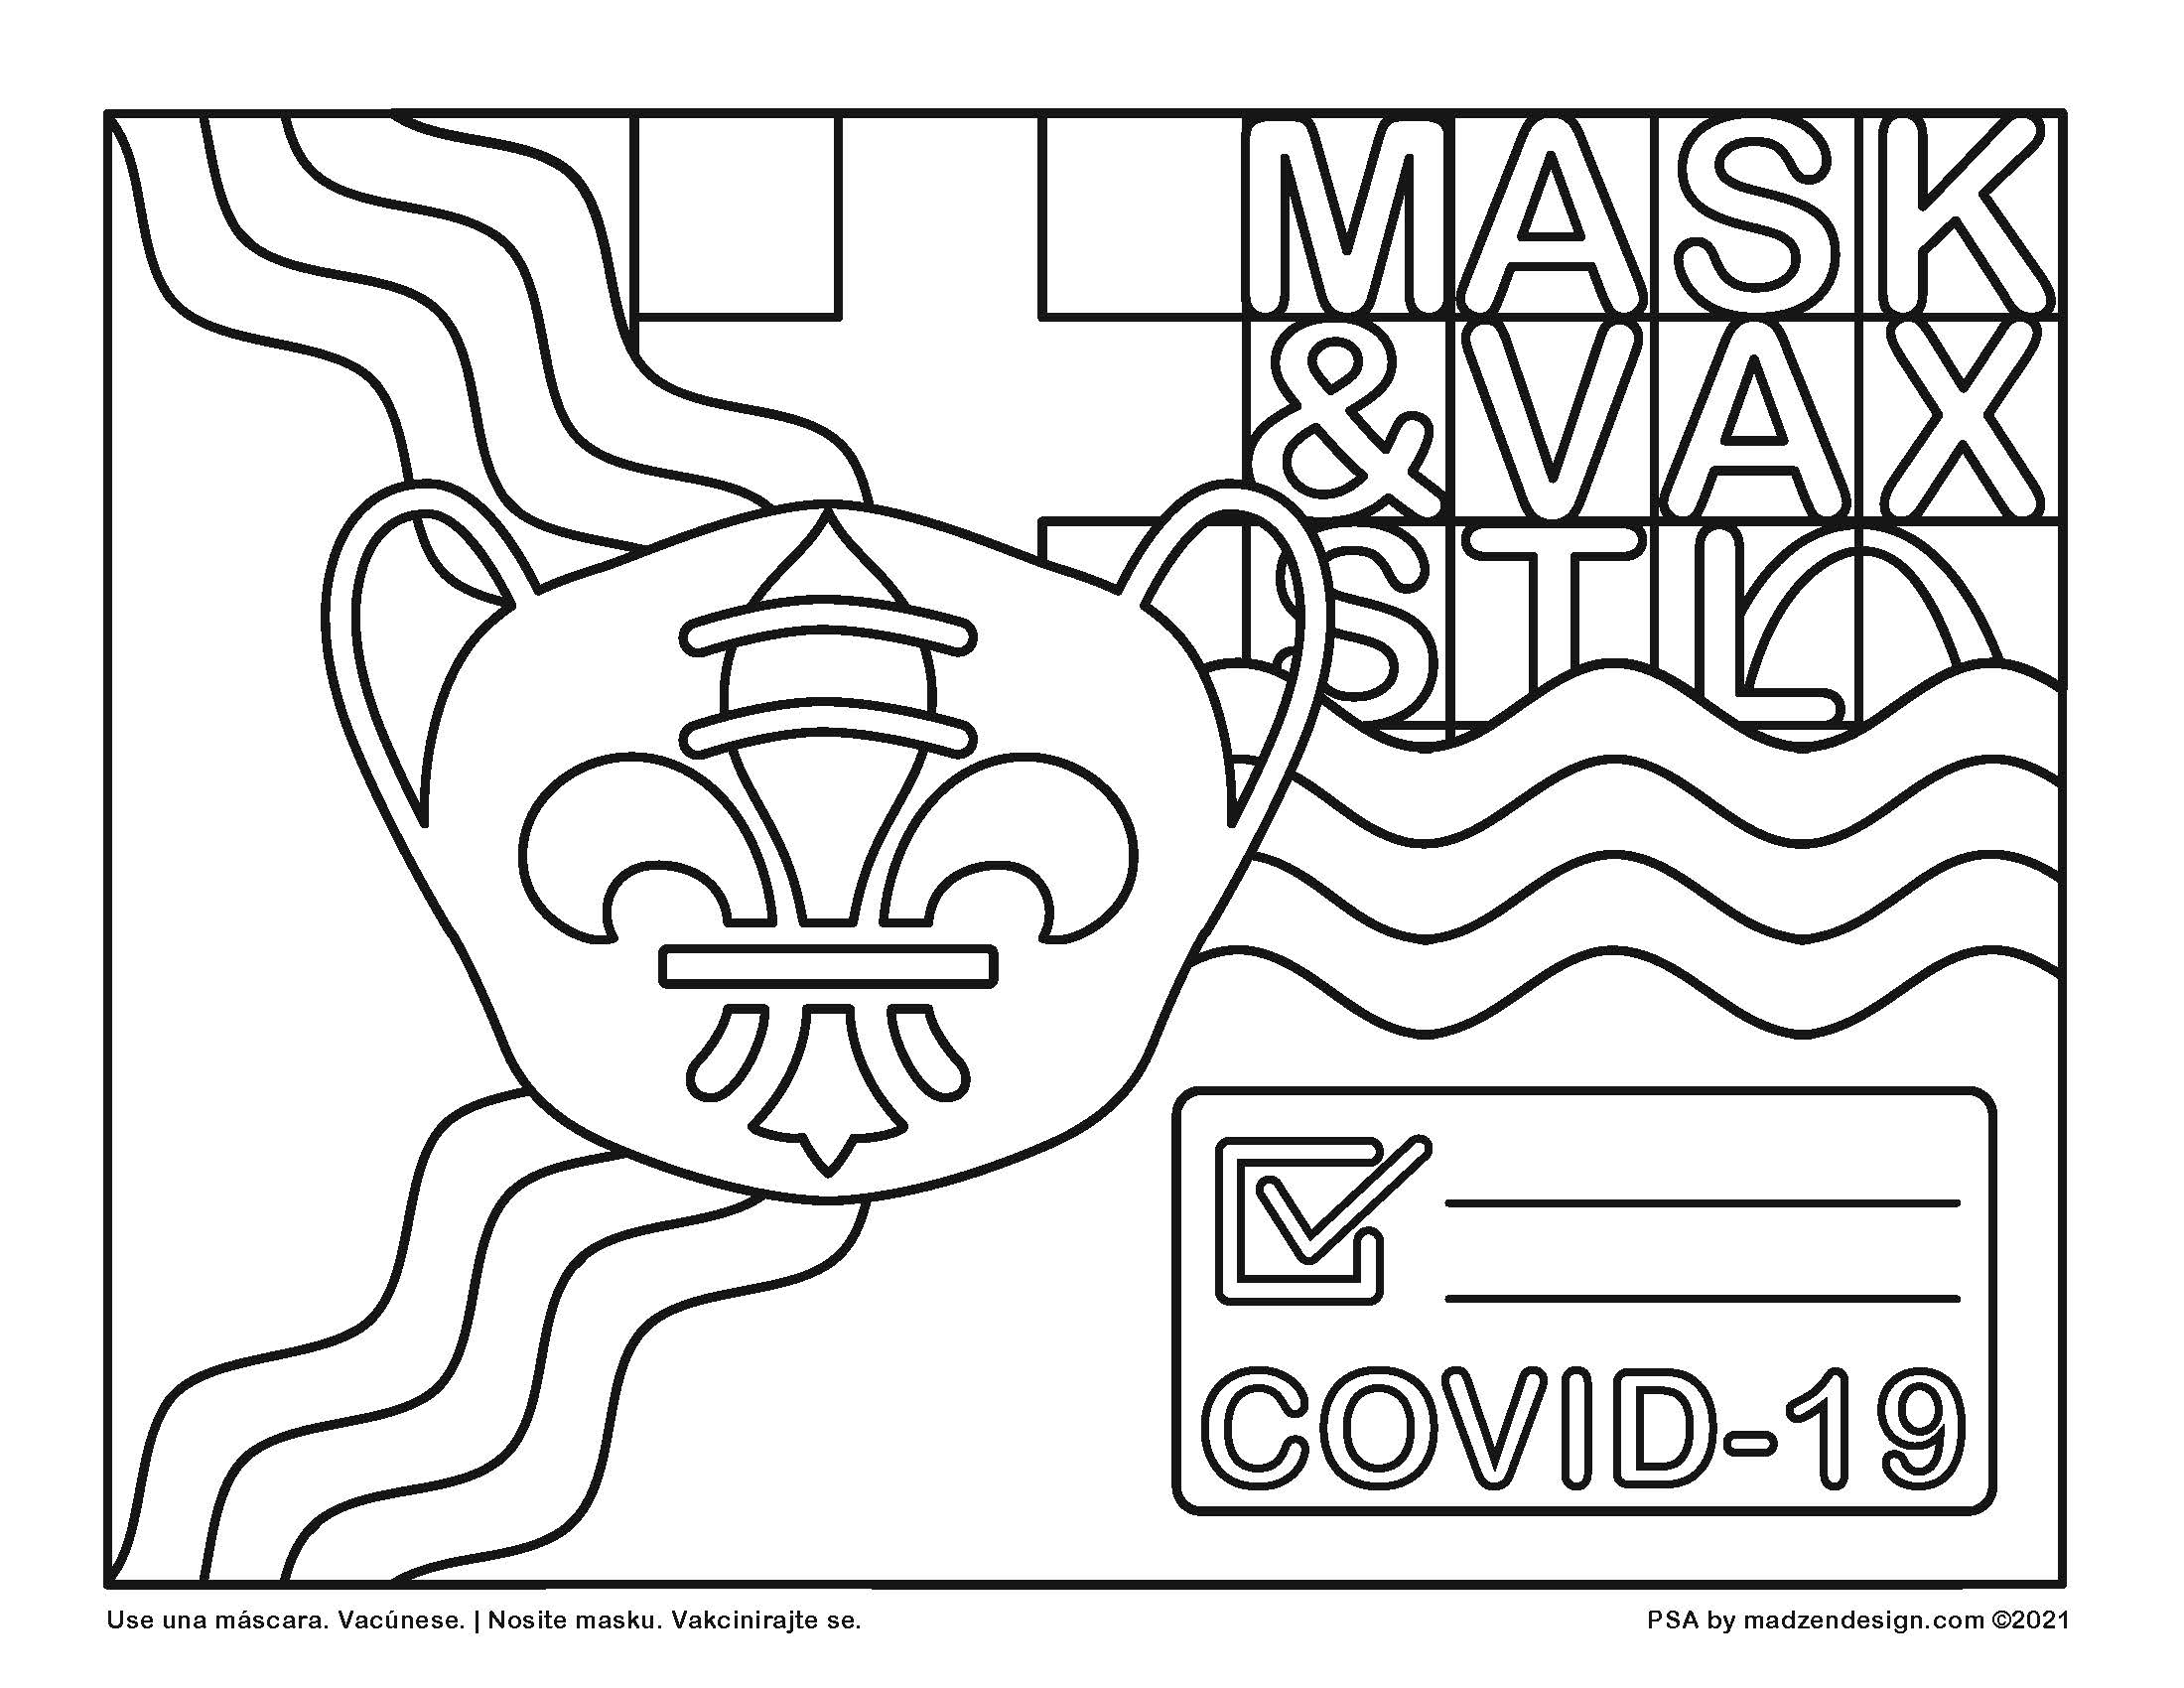 Coloring page to encourage vaccination and masking